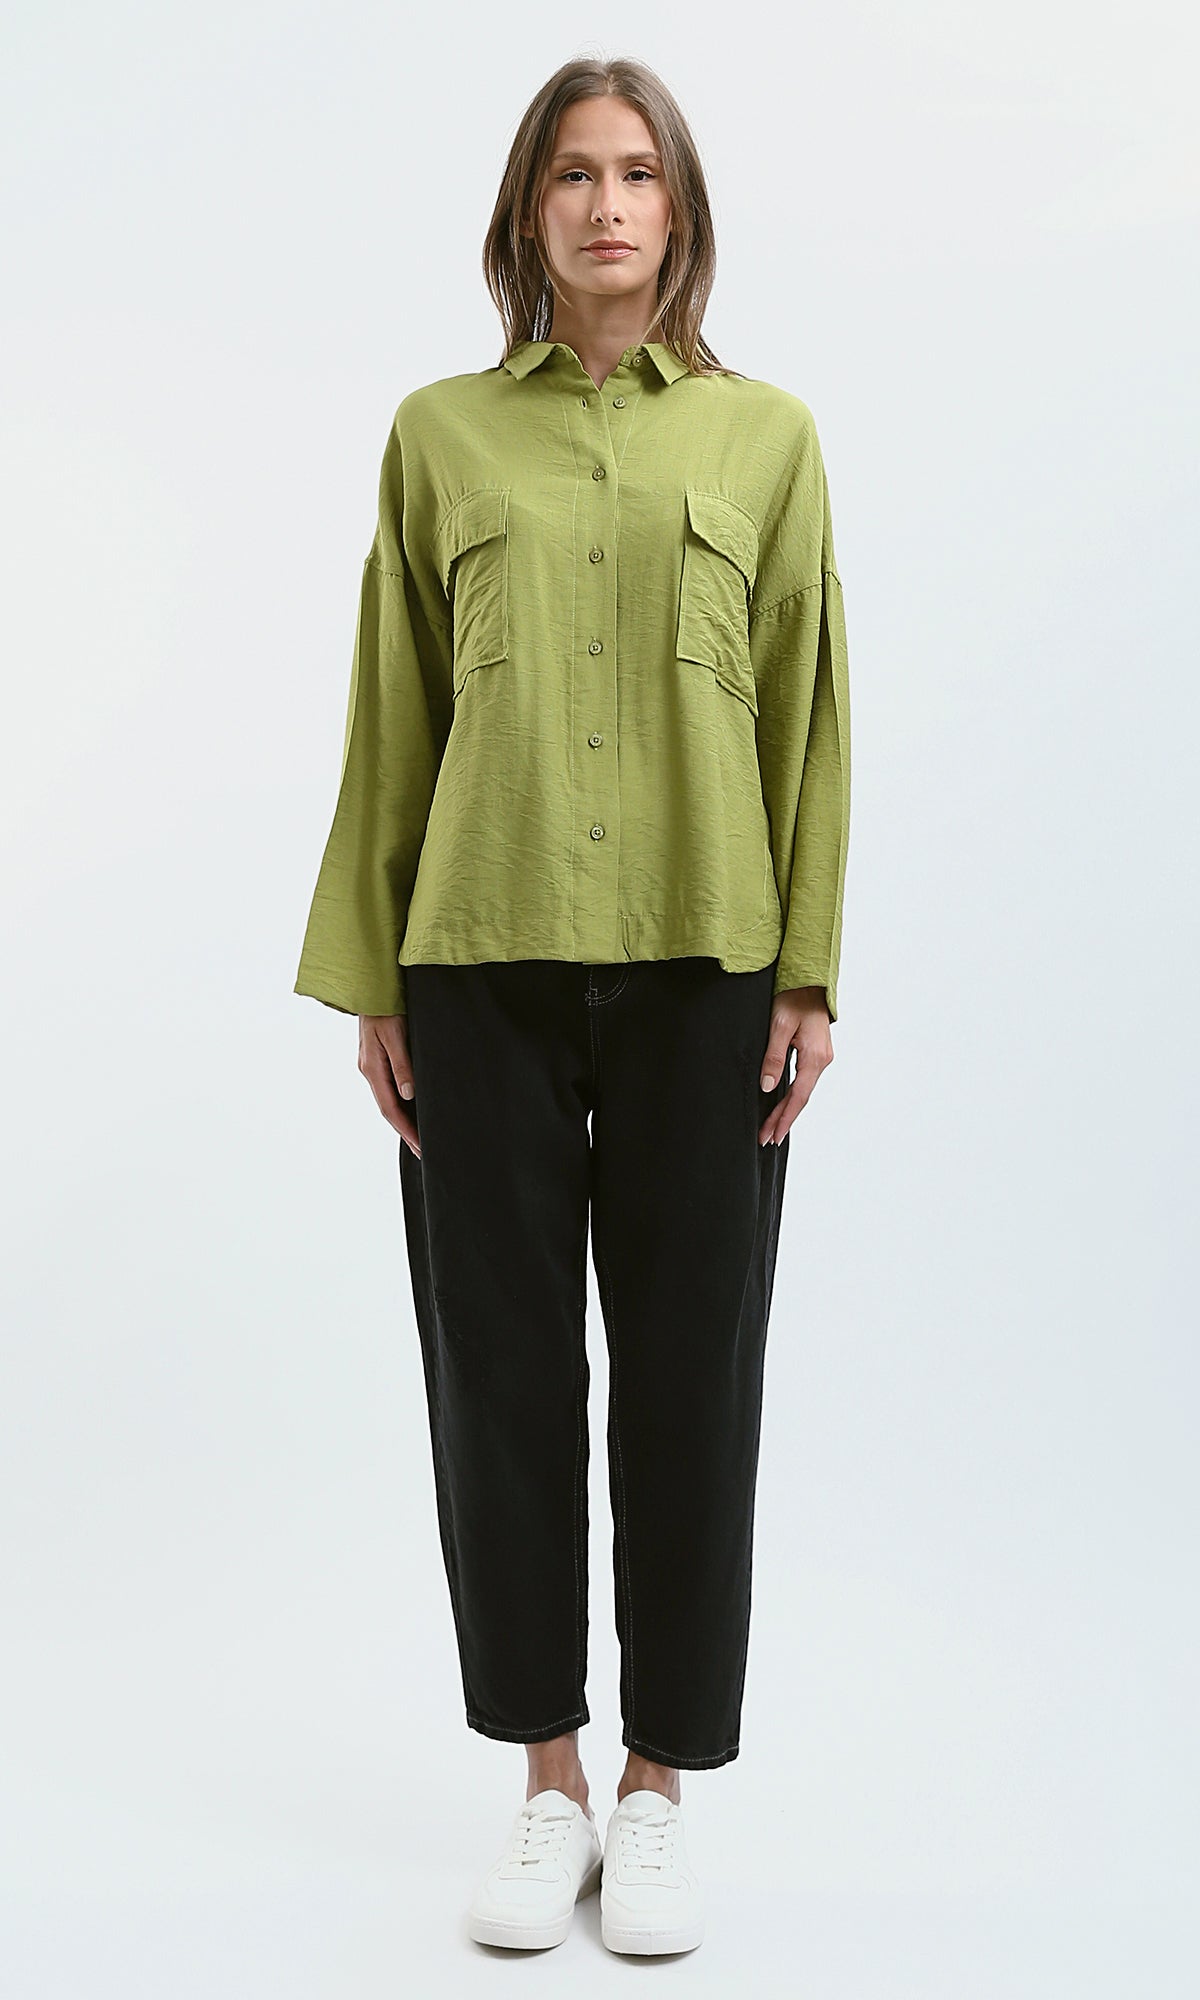 O179148 Drop-Shoulders Solid Apple Green Buttoned Shirt